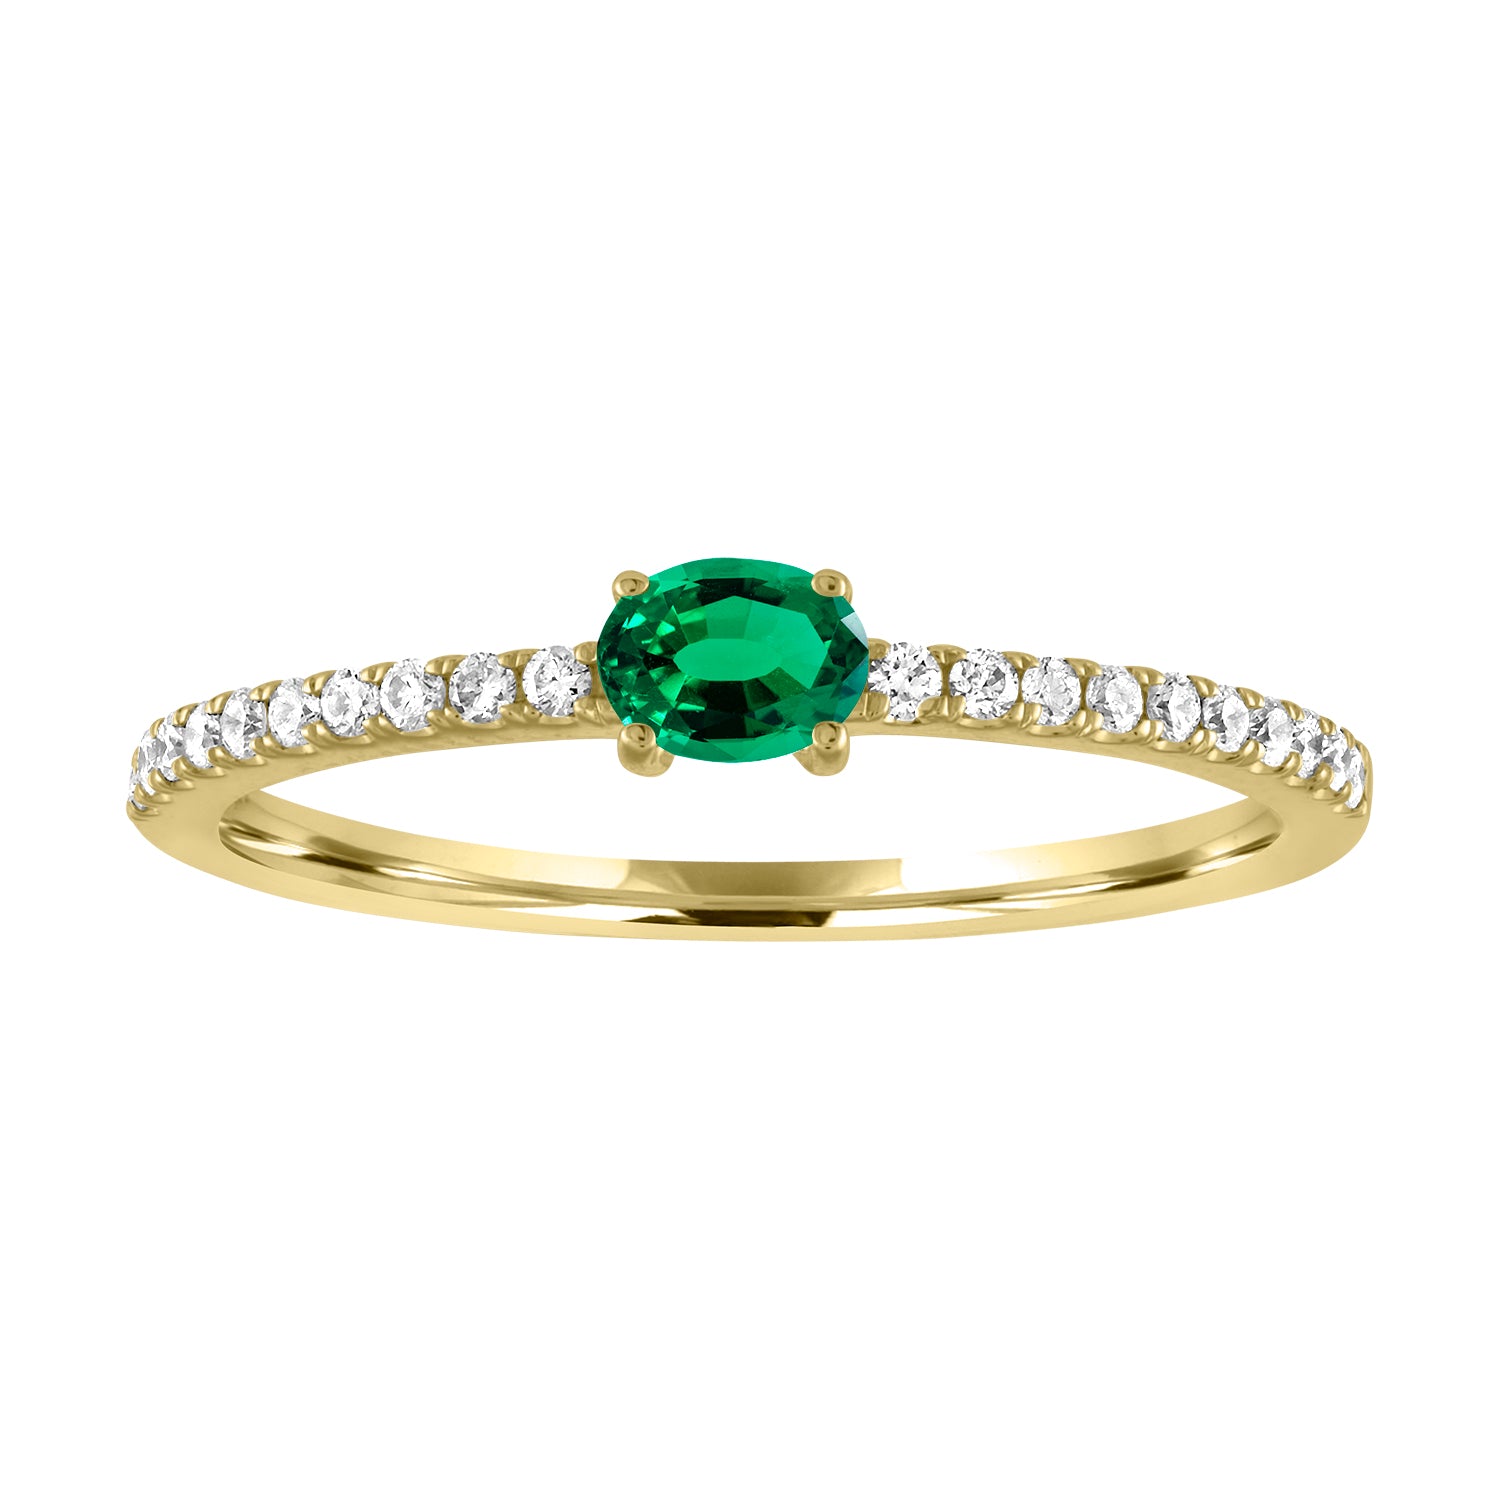 Yellow gold skinny band with an oval emerald in the center and round diamonds along the shank.